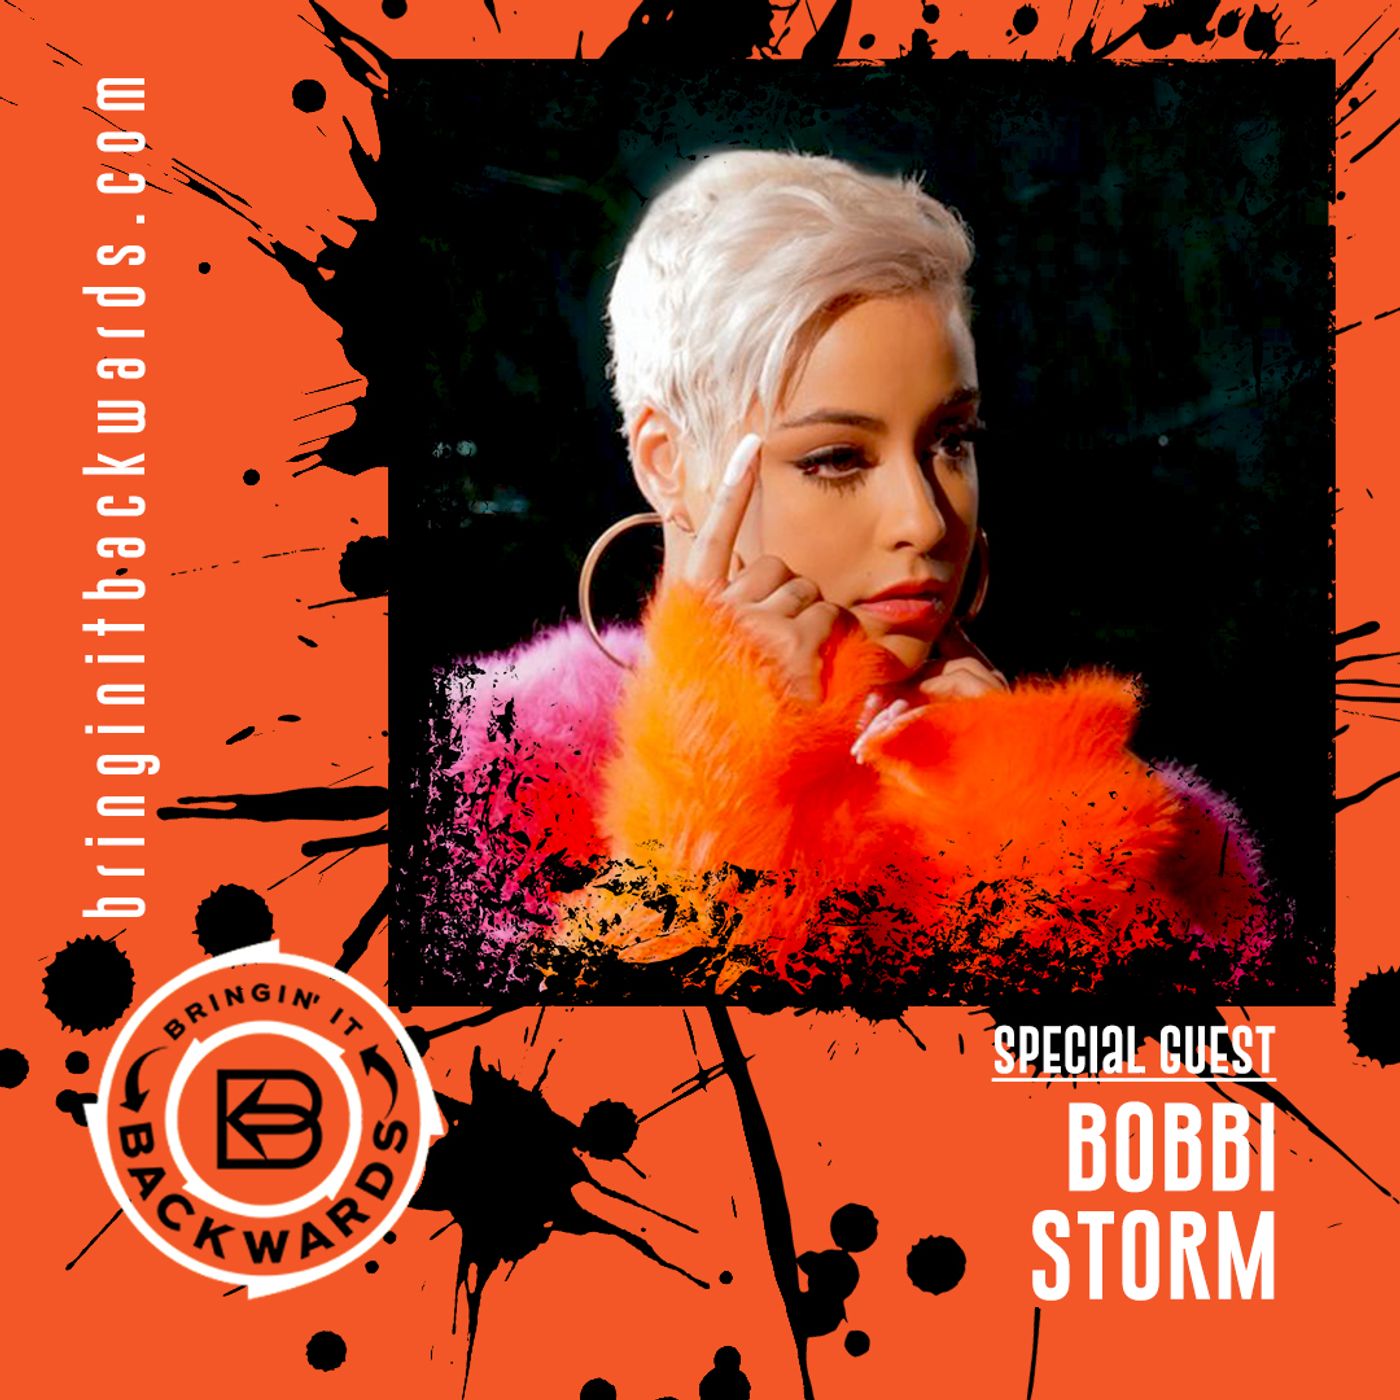 Interview with Bobbi Storm